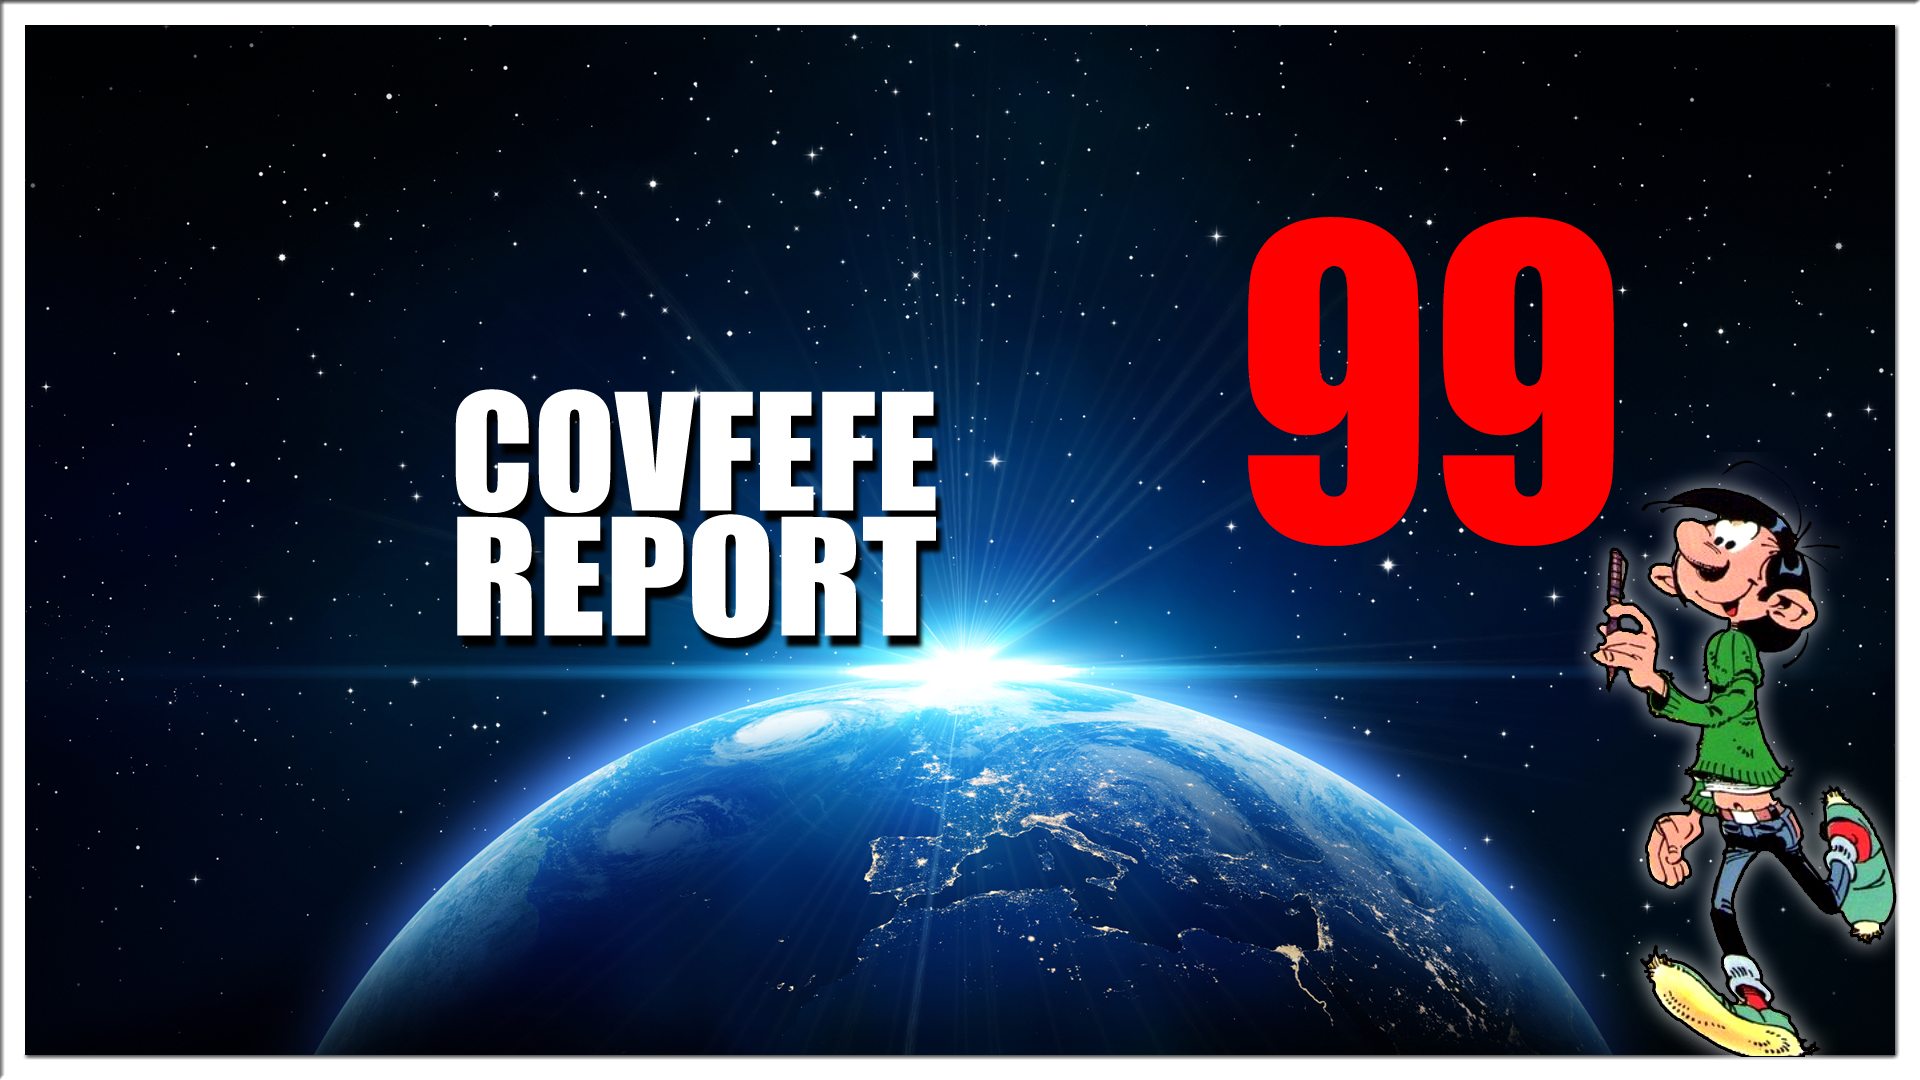 Covfefe Report 99.  Qpost Podesta emails, Pizzagate, China, Hooverdam, Buckle Up